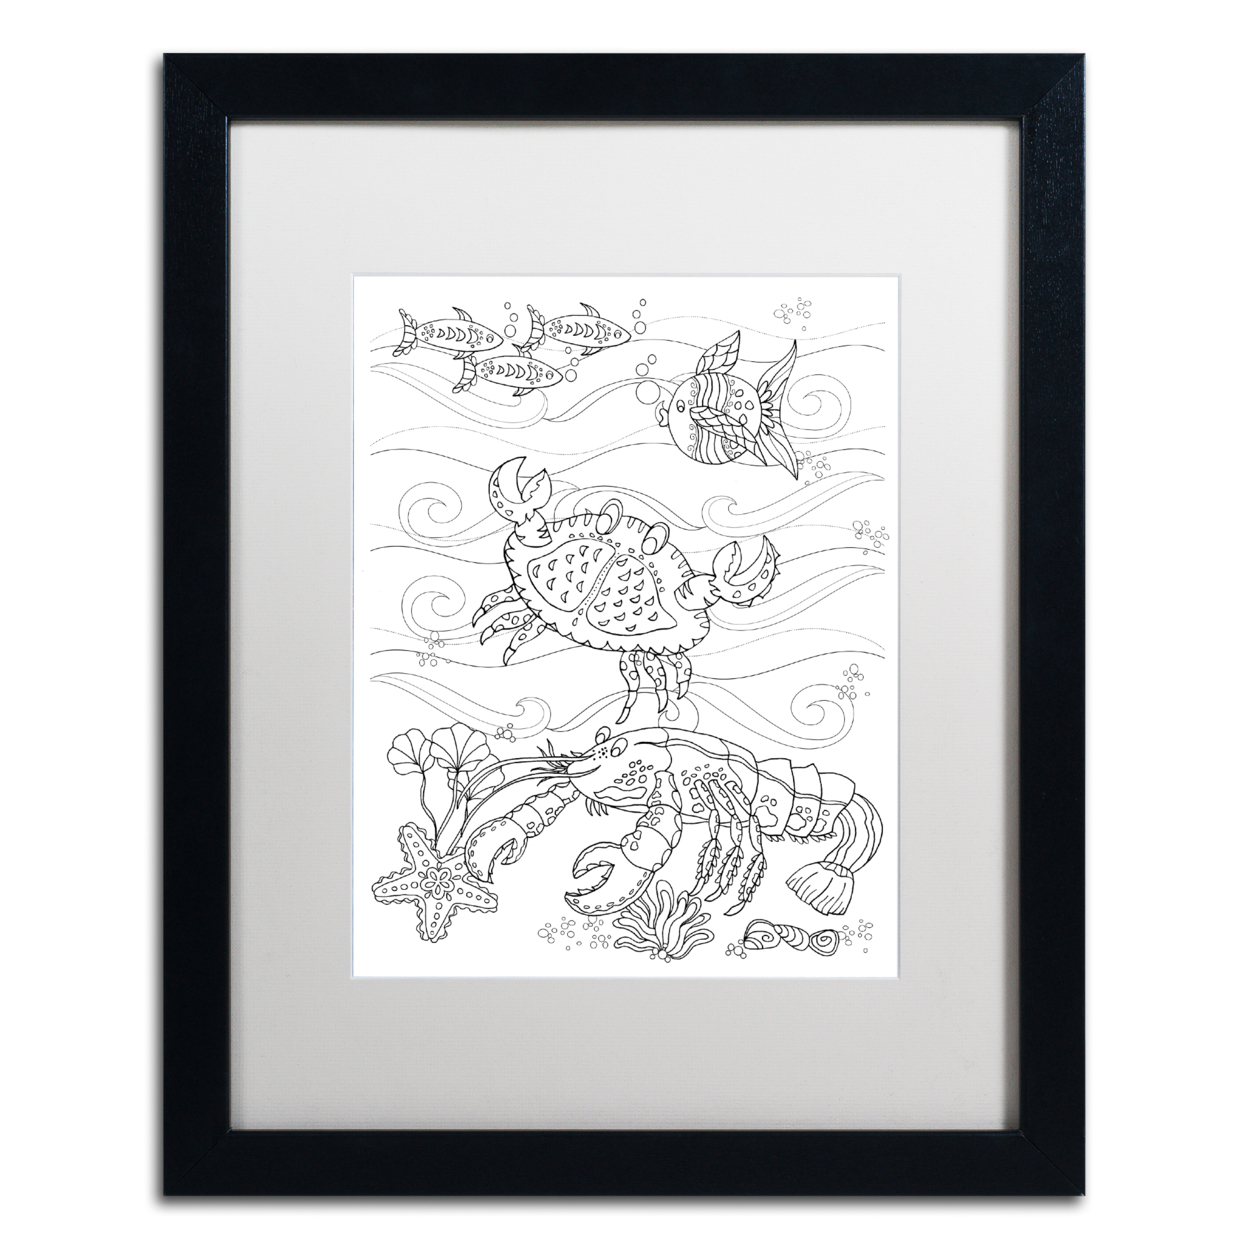 Lisa Powell Braun 'Crab And Lobster' Black Wooden Framed Art 18 X 22 Inches